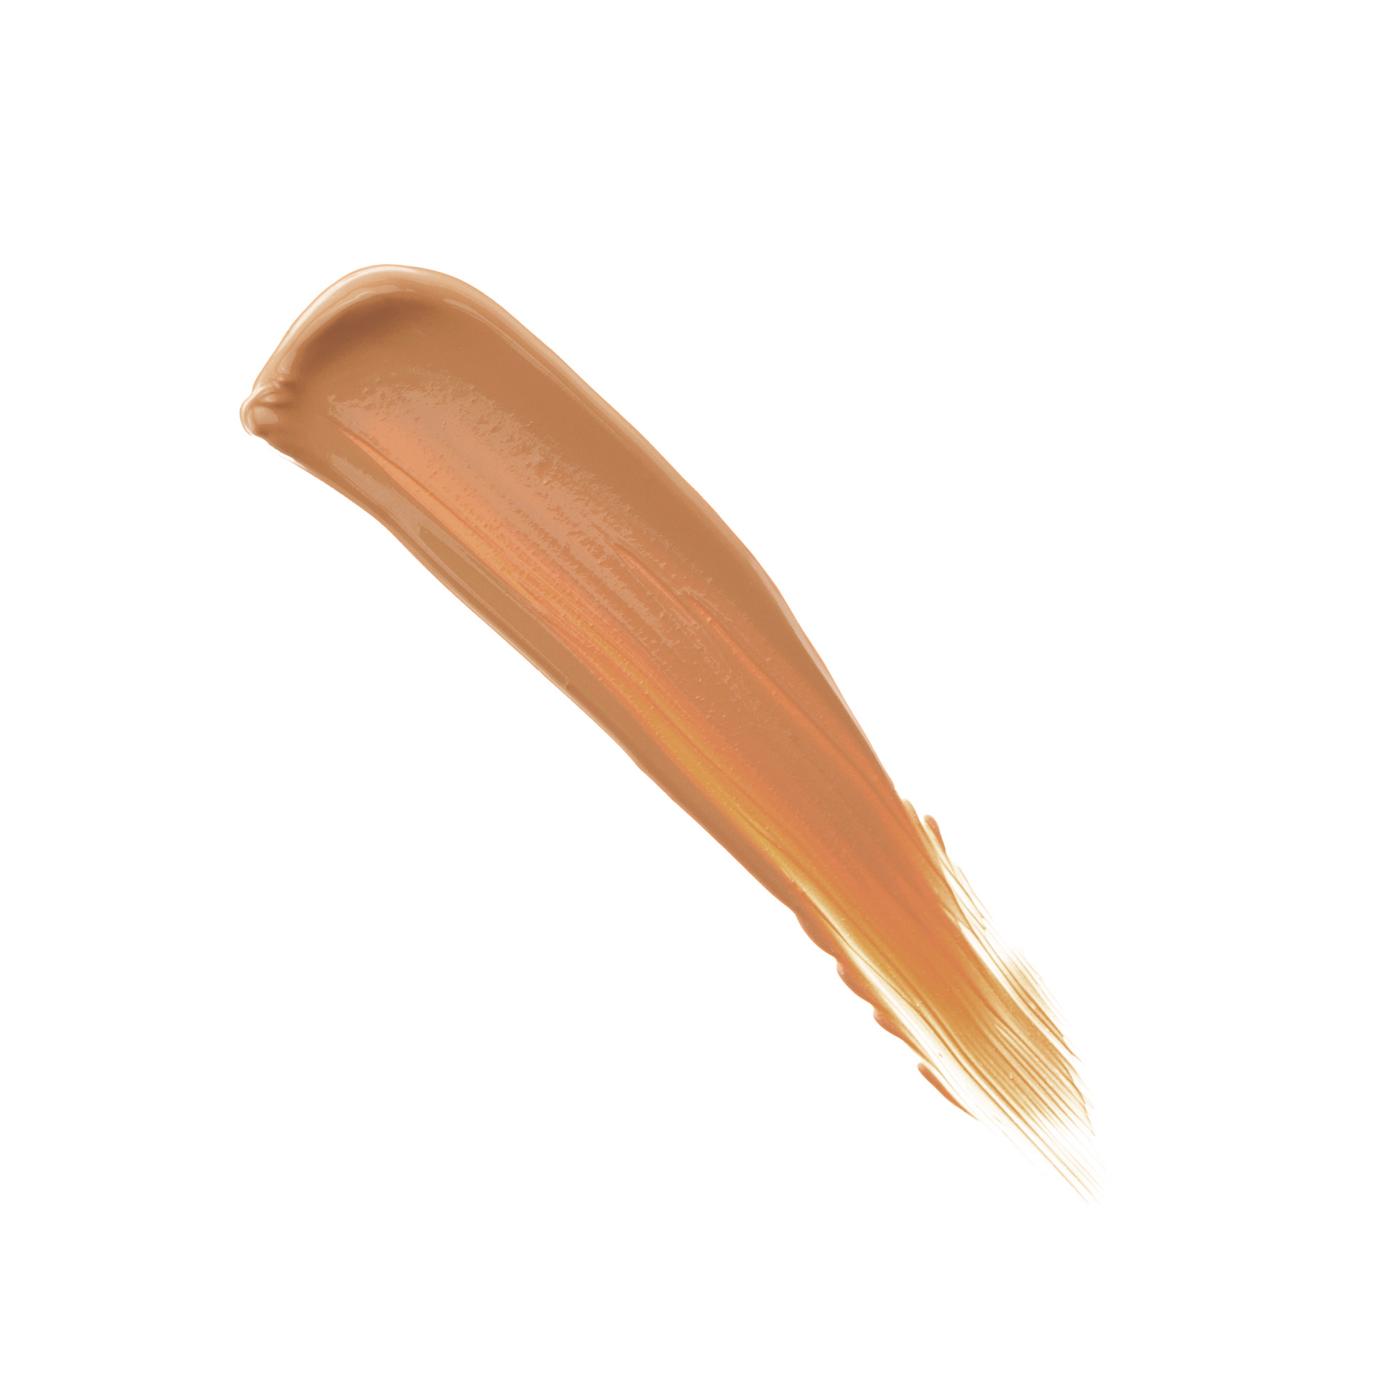 Milani Conceal +Perfect Longwear Concealer - Cool Sand; image 2 of 9